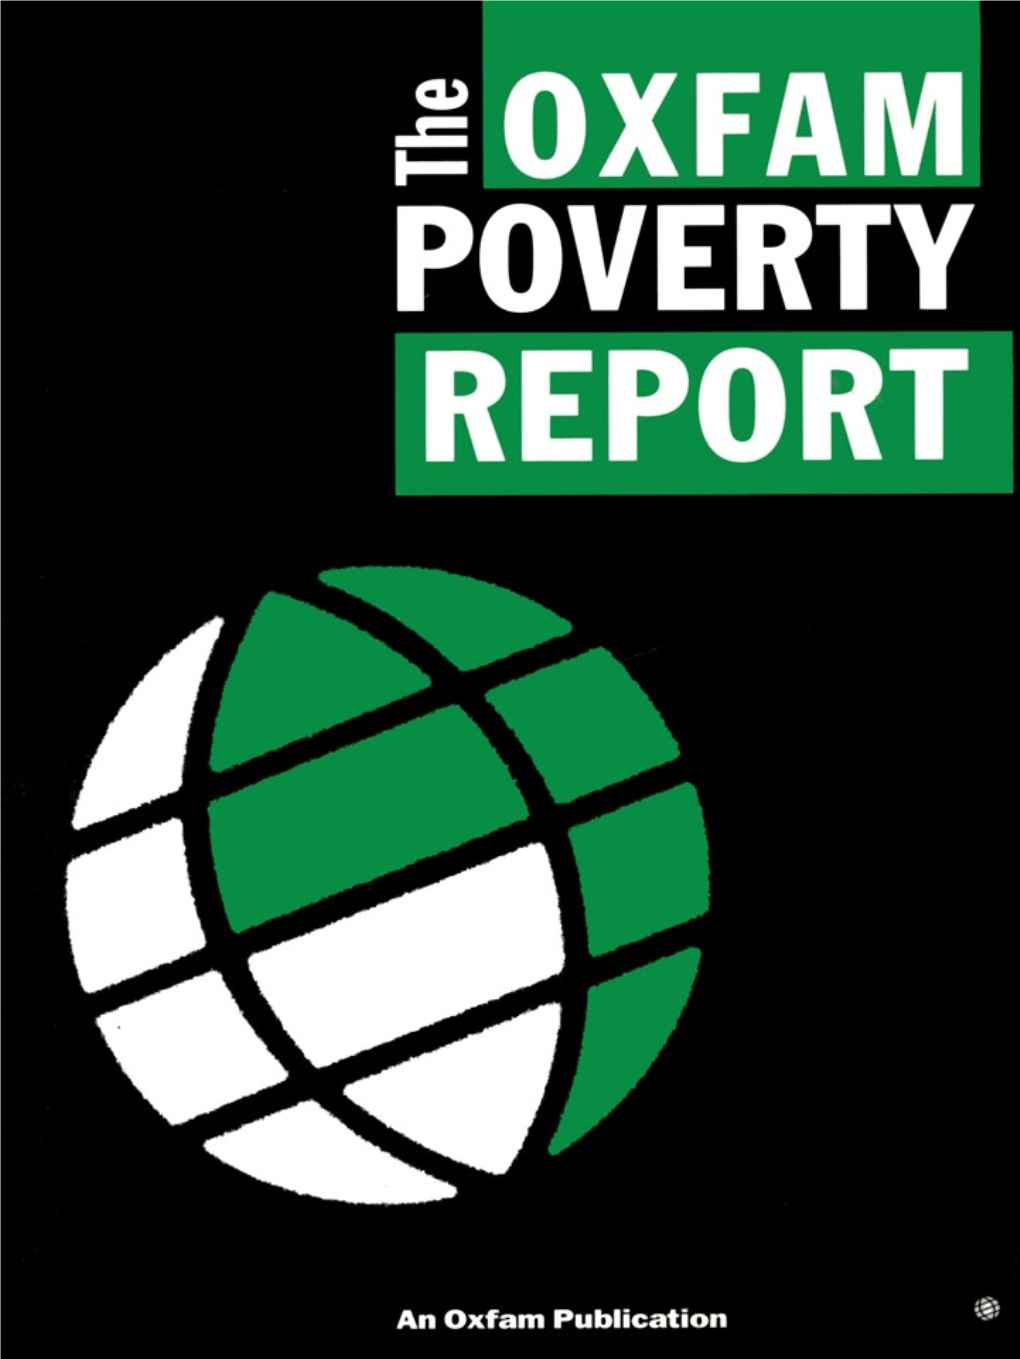 OXFAM POVERTY REPORT Kevin Watkins